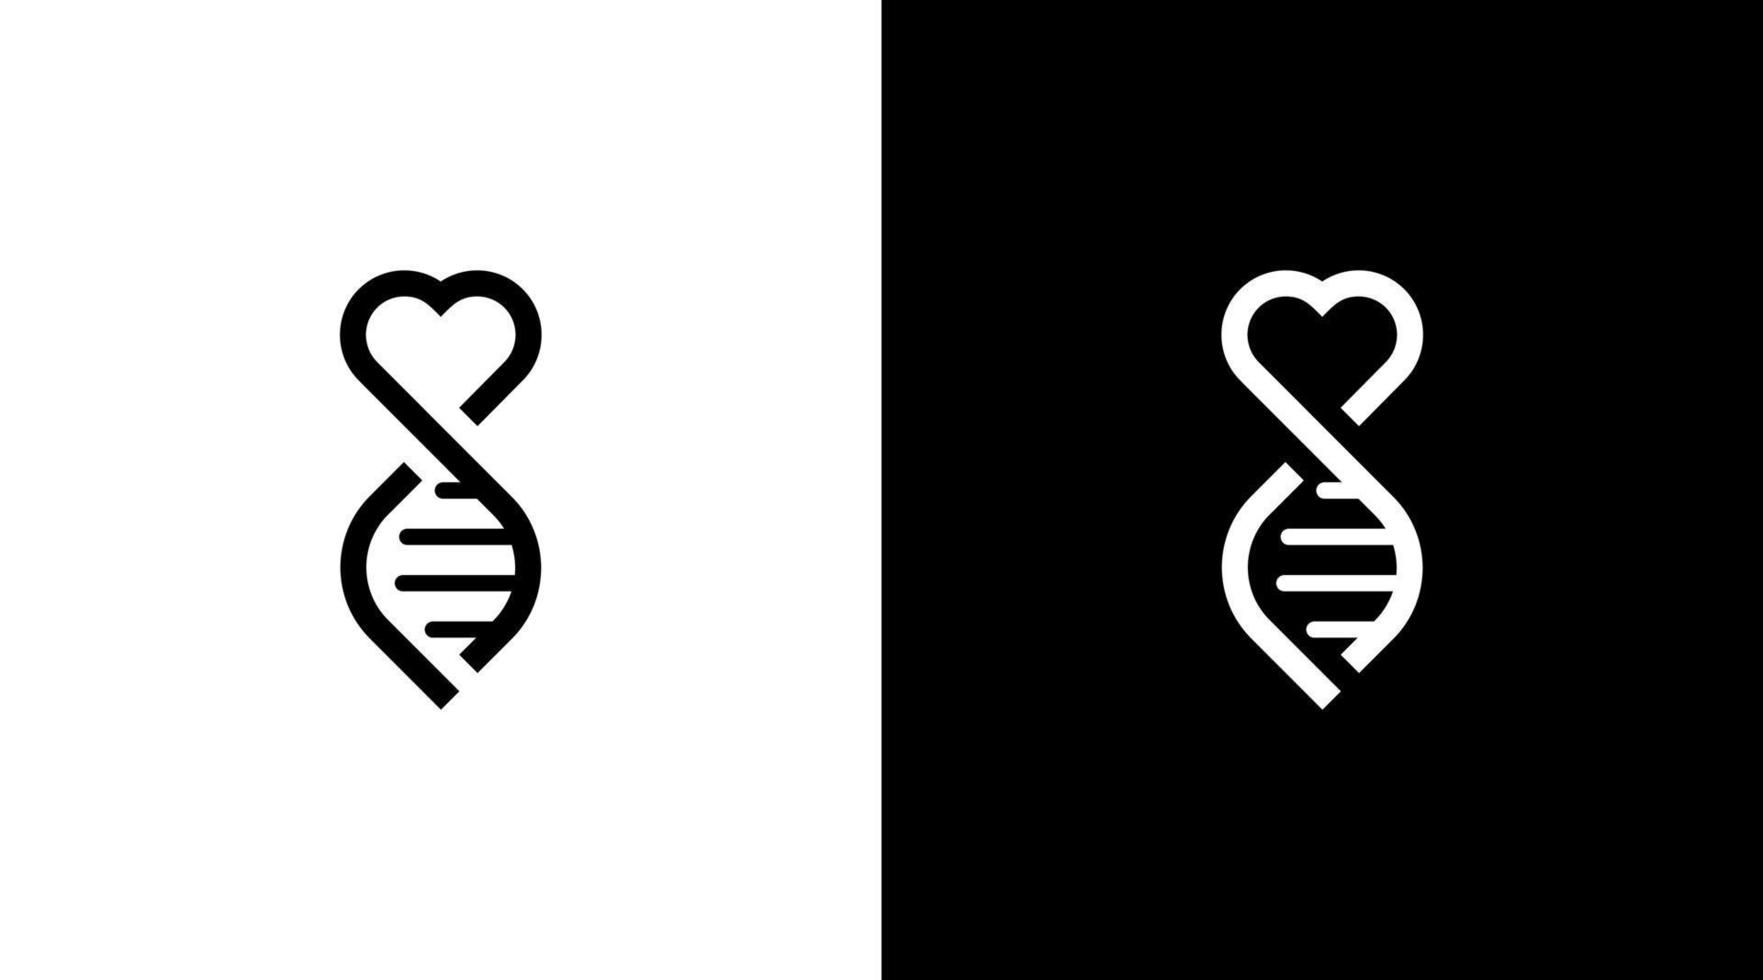 Love and dna logo medical healthcare black and white icon style Design template vector